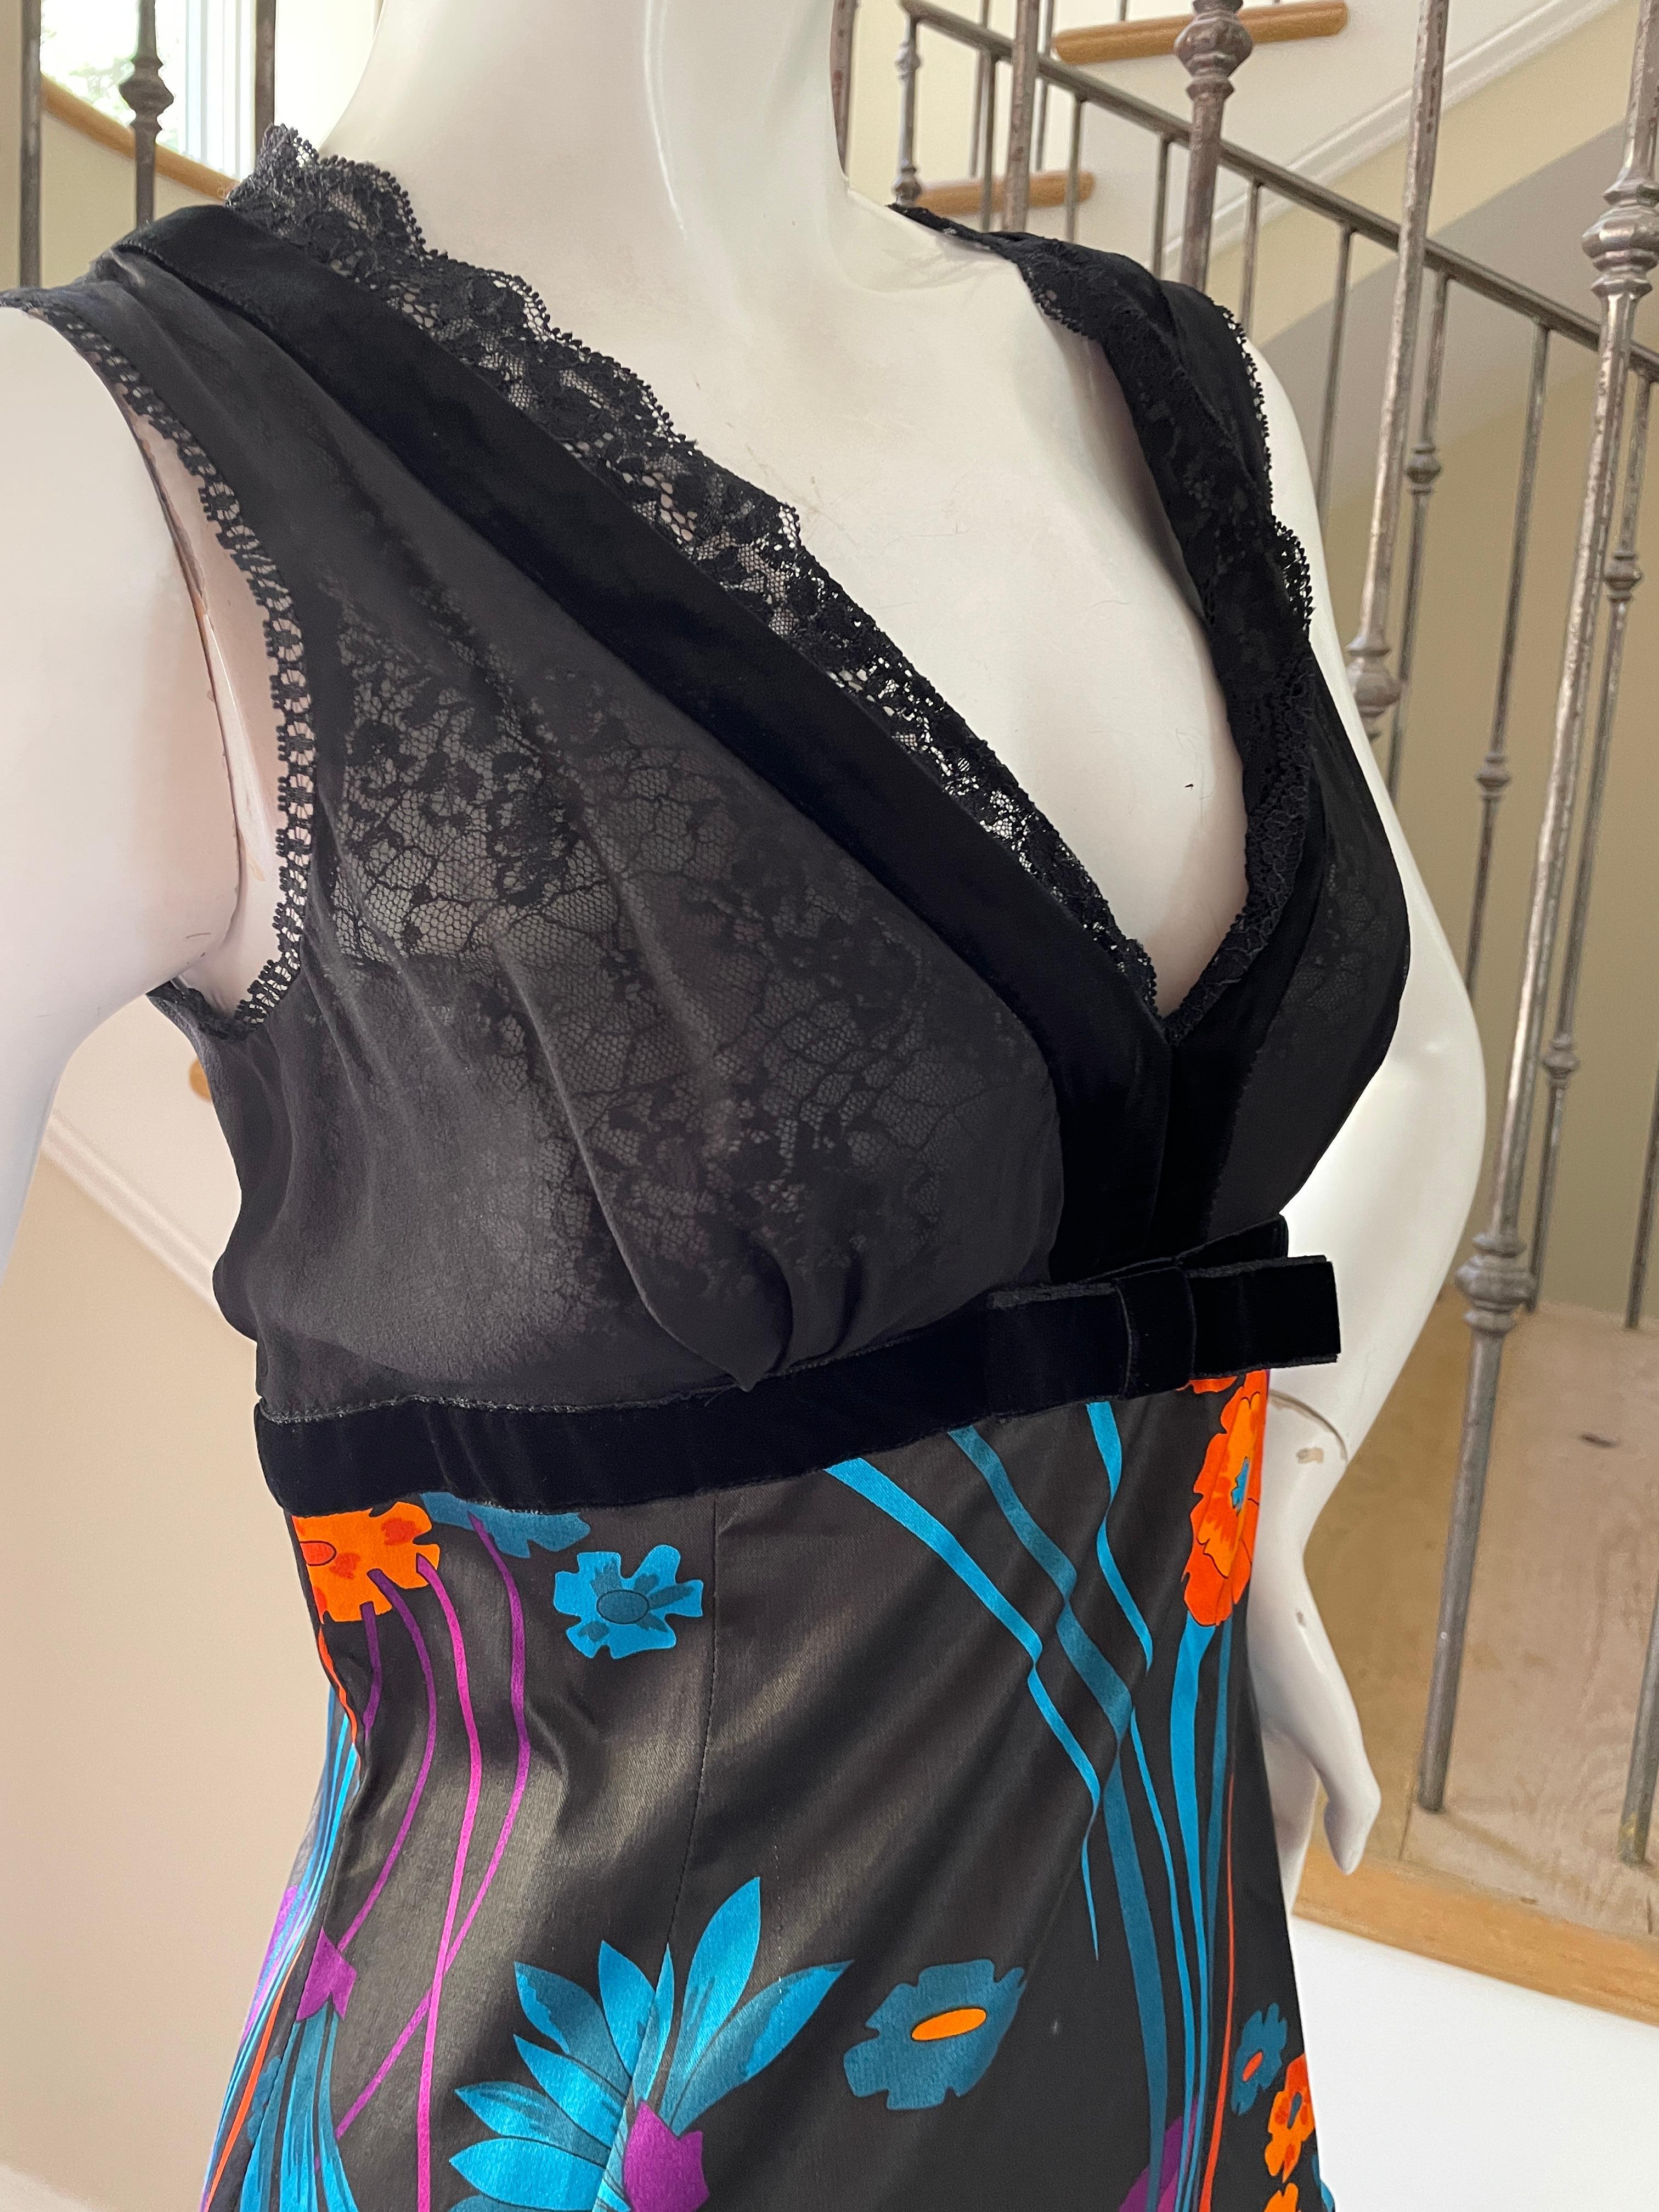 D&G Dolce & Gabbana Mod Print Velvet Trim Cocktail Dress with Sheer Bust In Excellent Condition For Sale In Cloverdale, CA